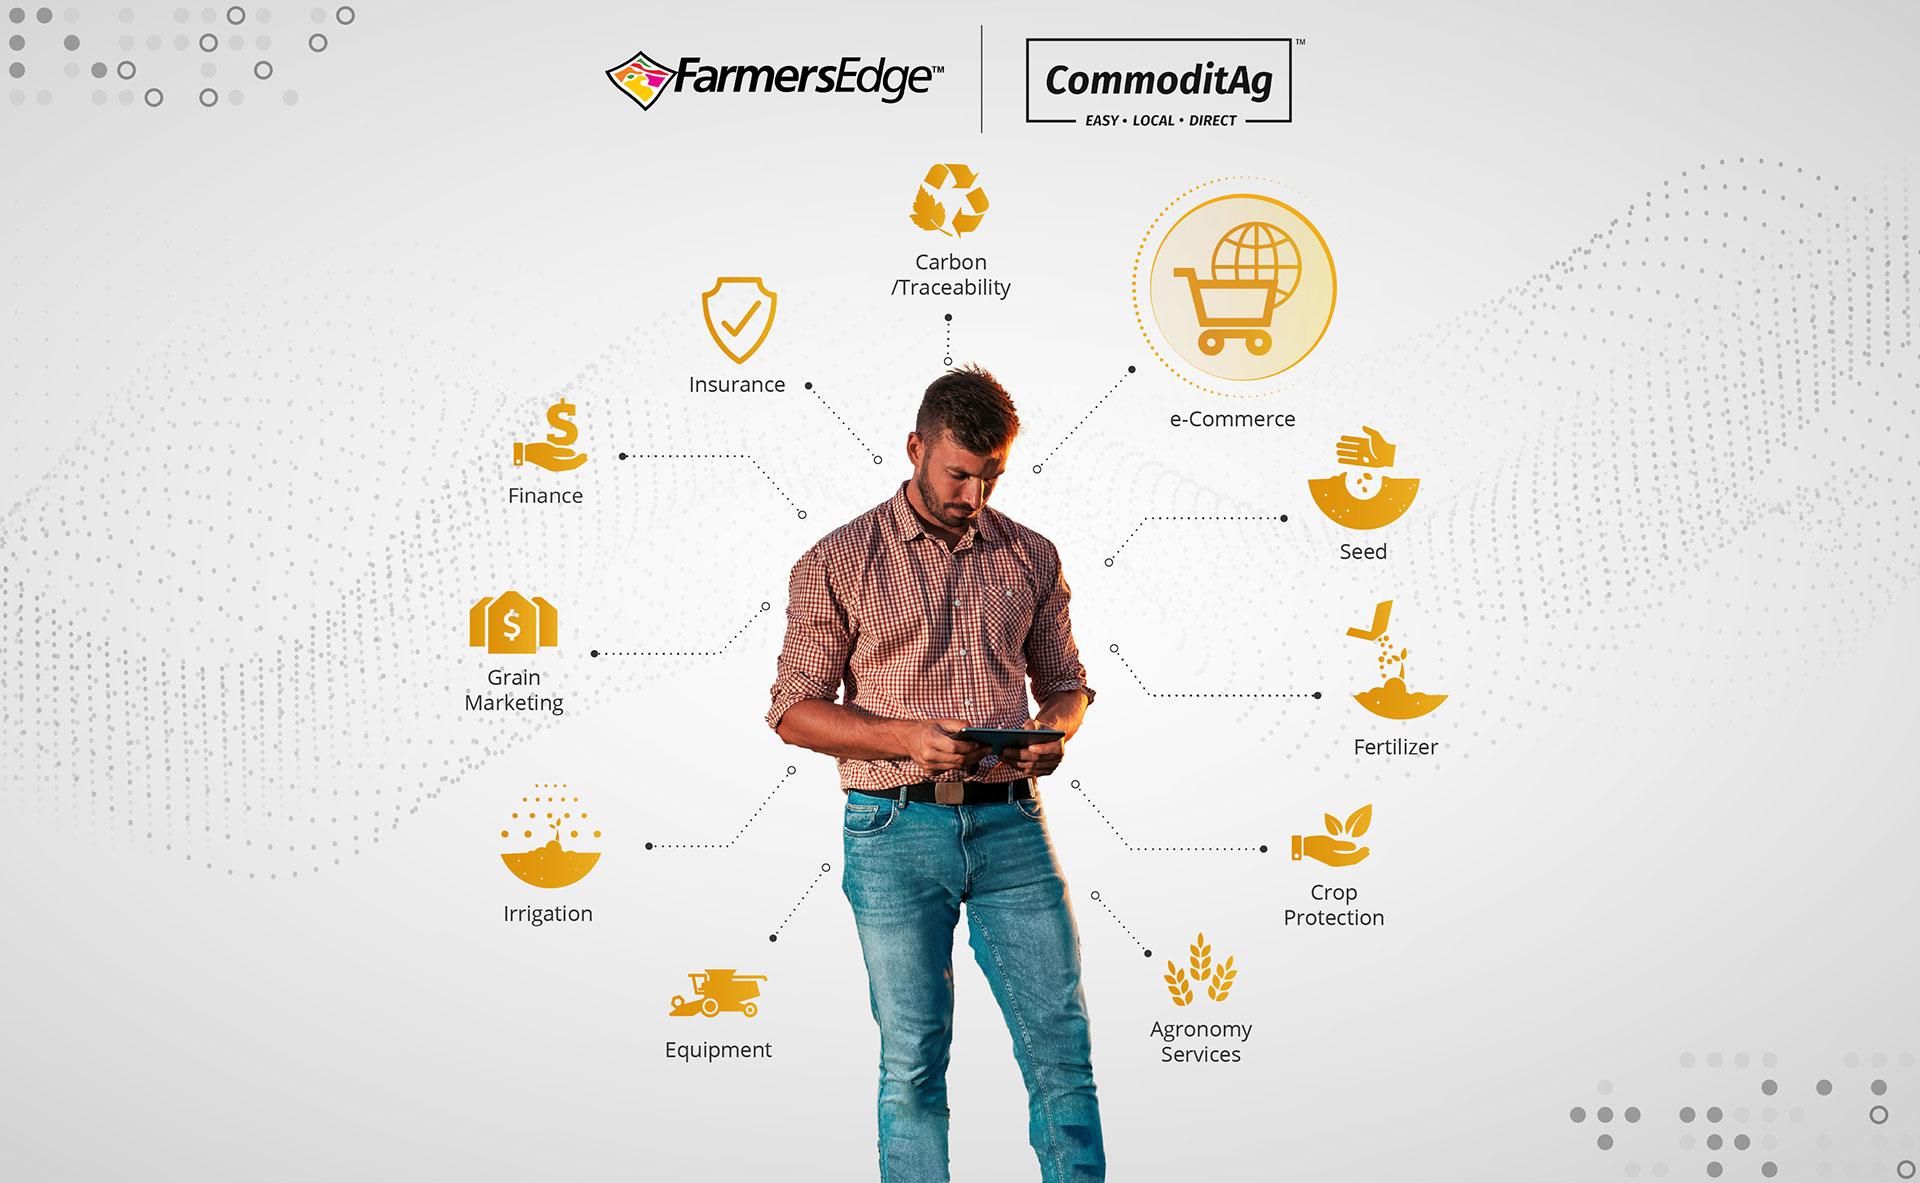 Farmers Edge to Acquire Indiana-based CommoditAg to Expand Agriculture e-Commerce Presence